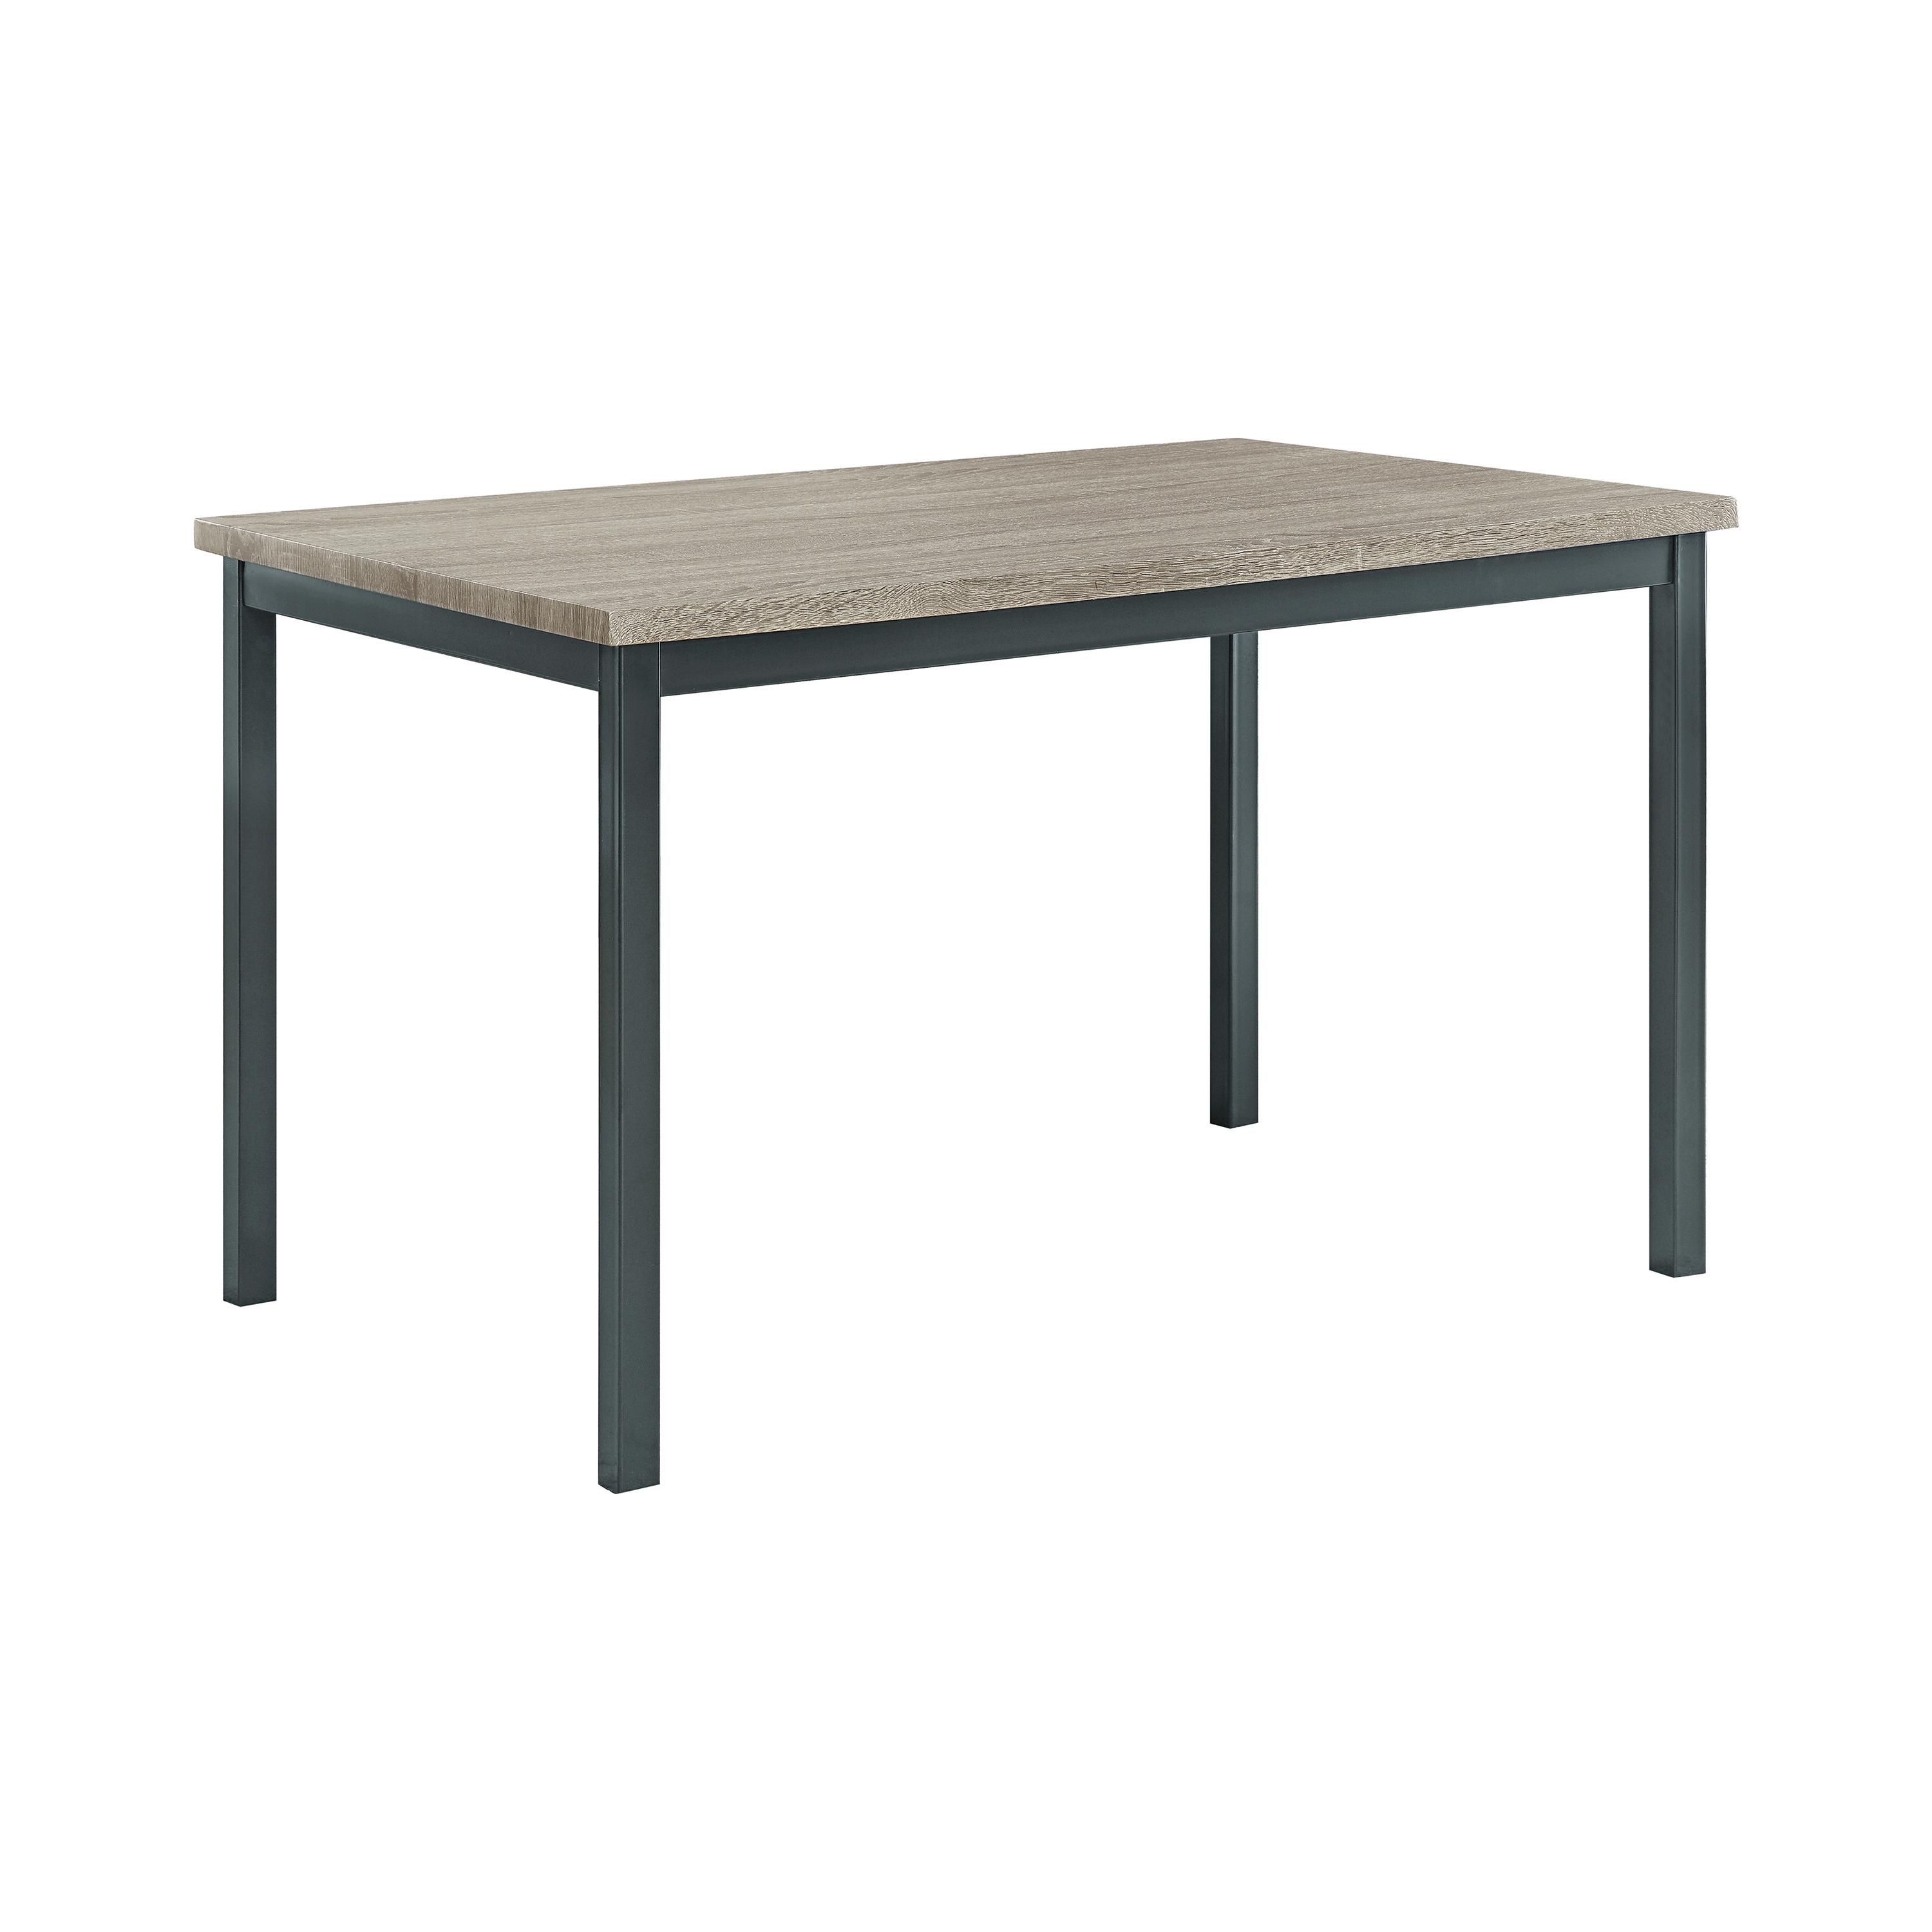 Transitional Dining Table 100611 Garza 100611 in Black 